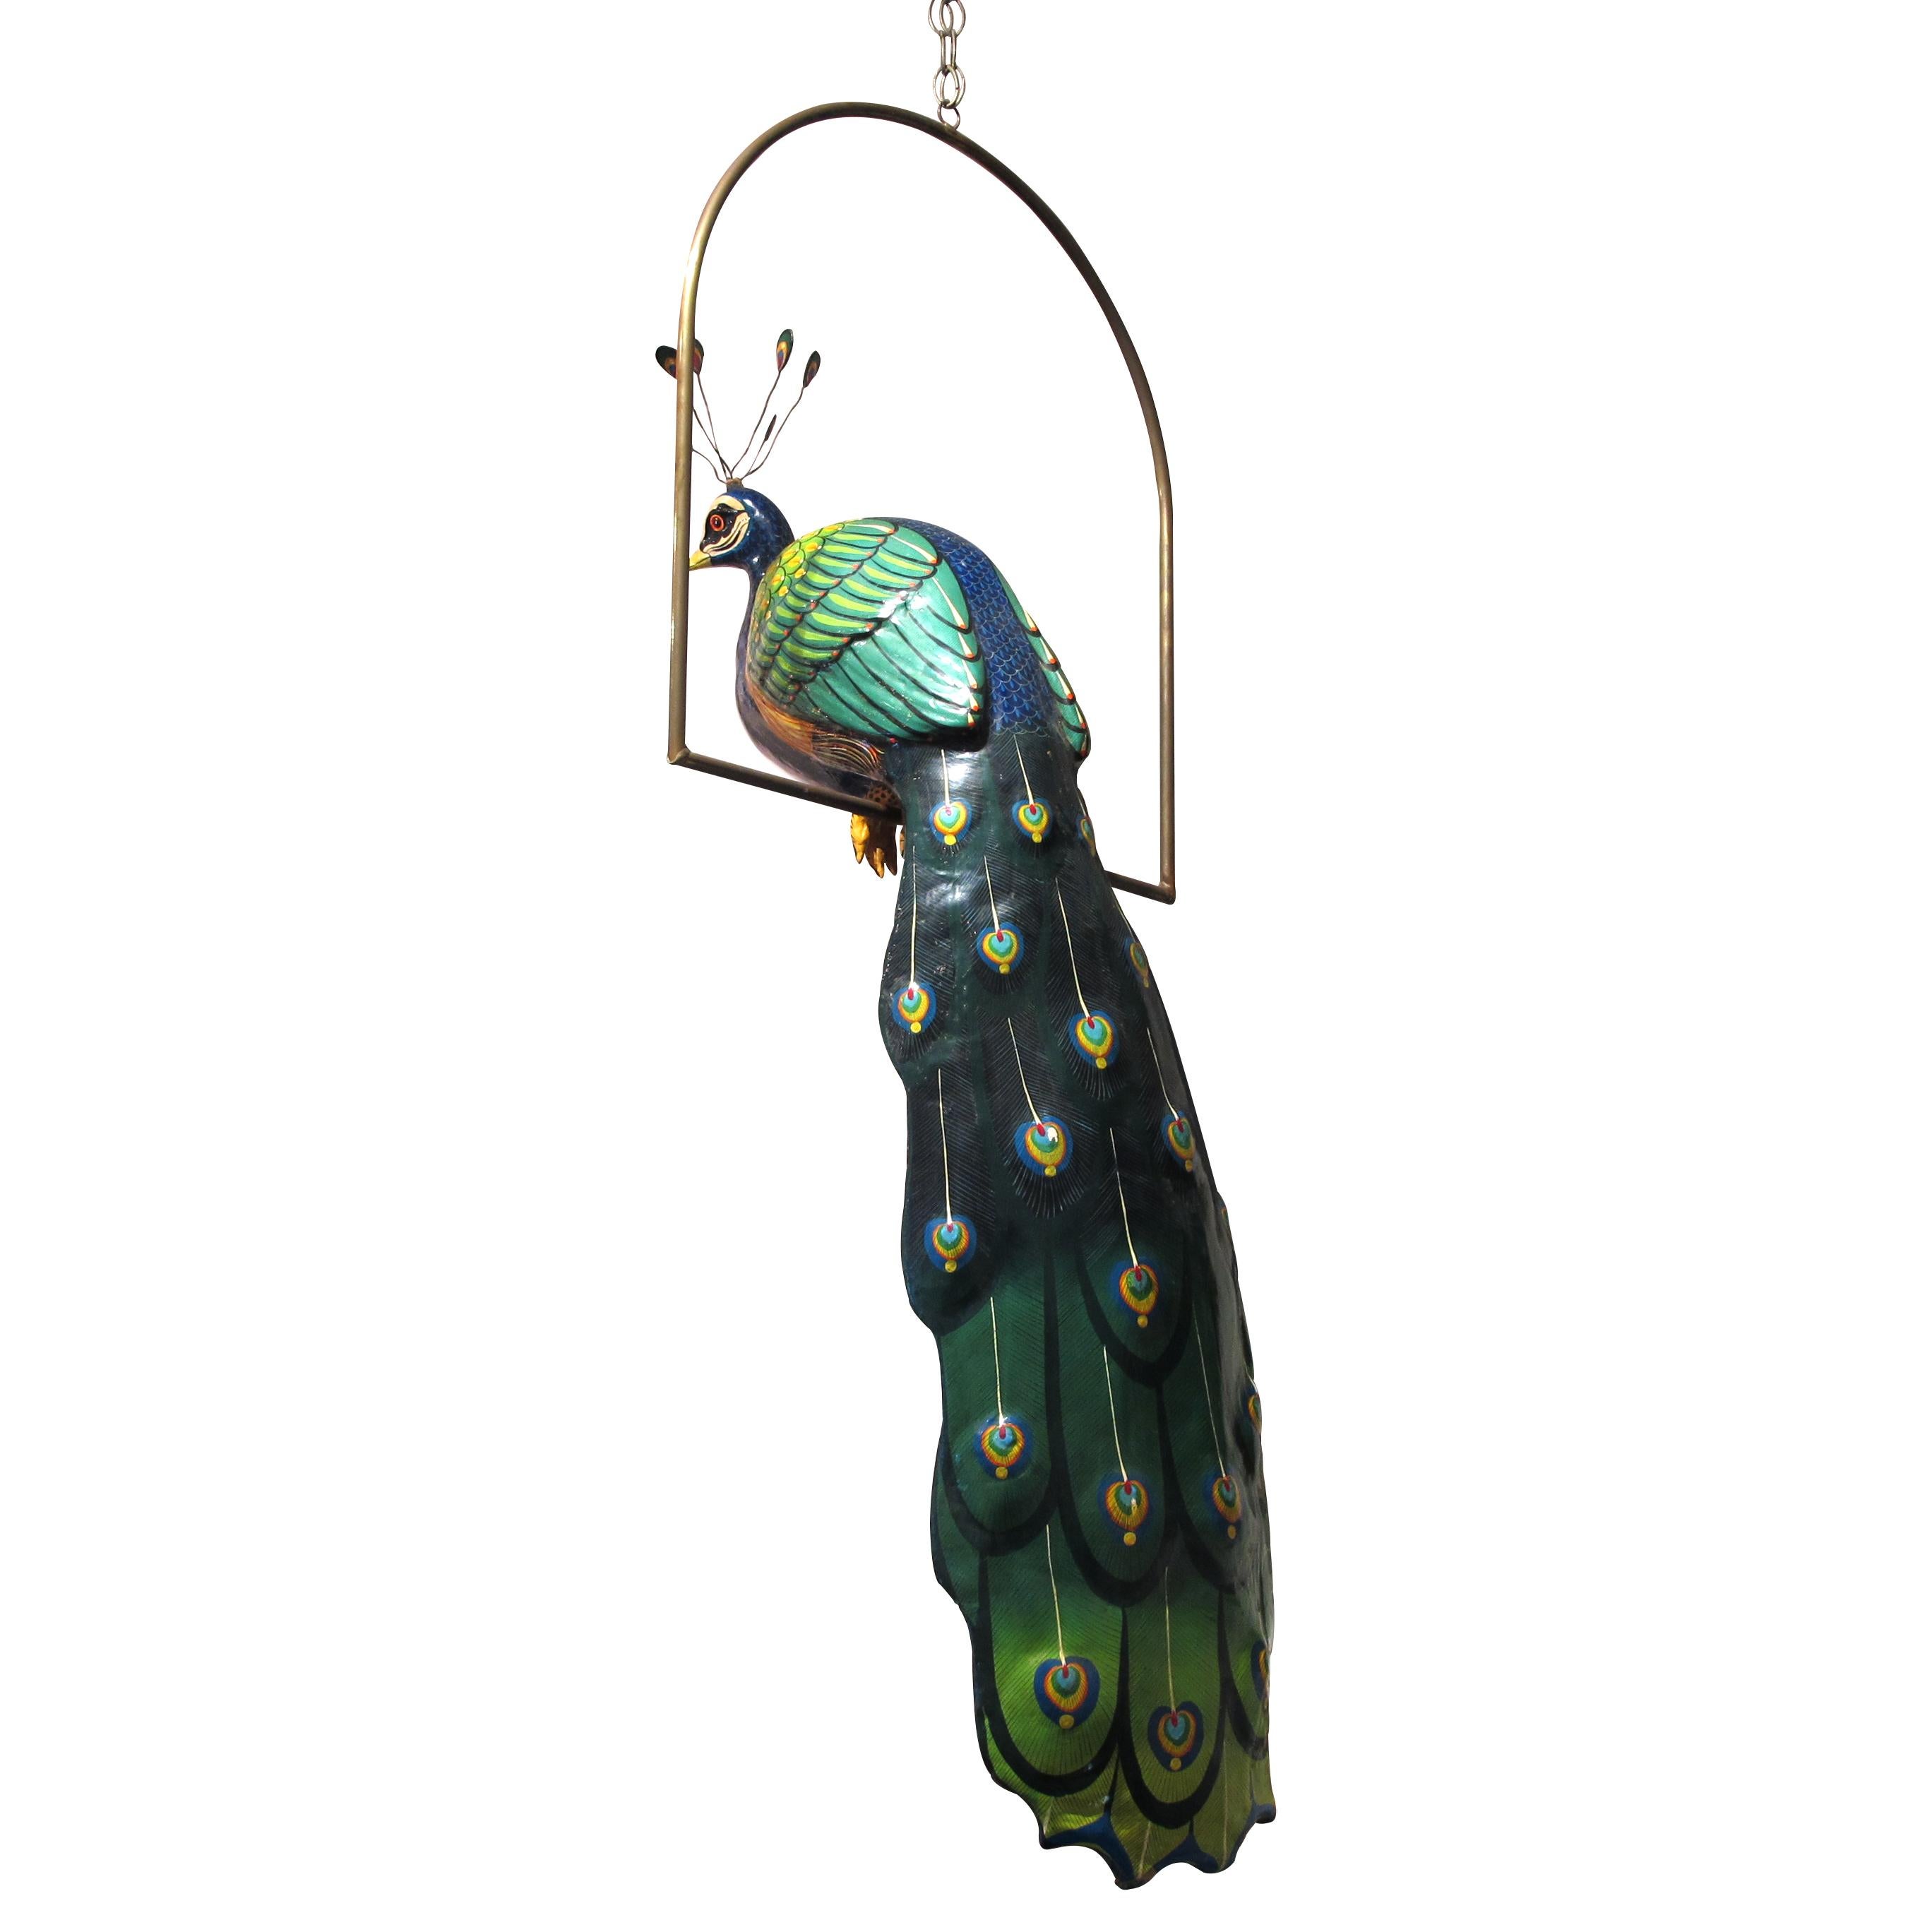 Beautiful life size papier maché sculpture of a peacock, perched on a brass frame, by Mexican artist Carlos Del Conde, who is known for his sculptures of papier maché colourful exotic birds. Carlos Del Conde also collaborated with the Mexican artist